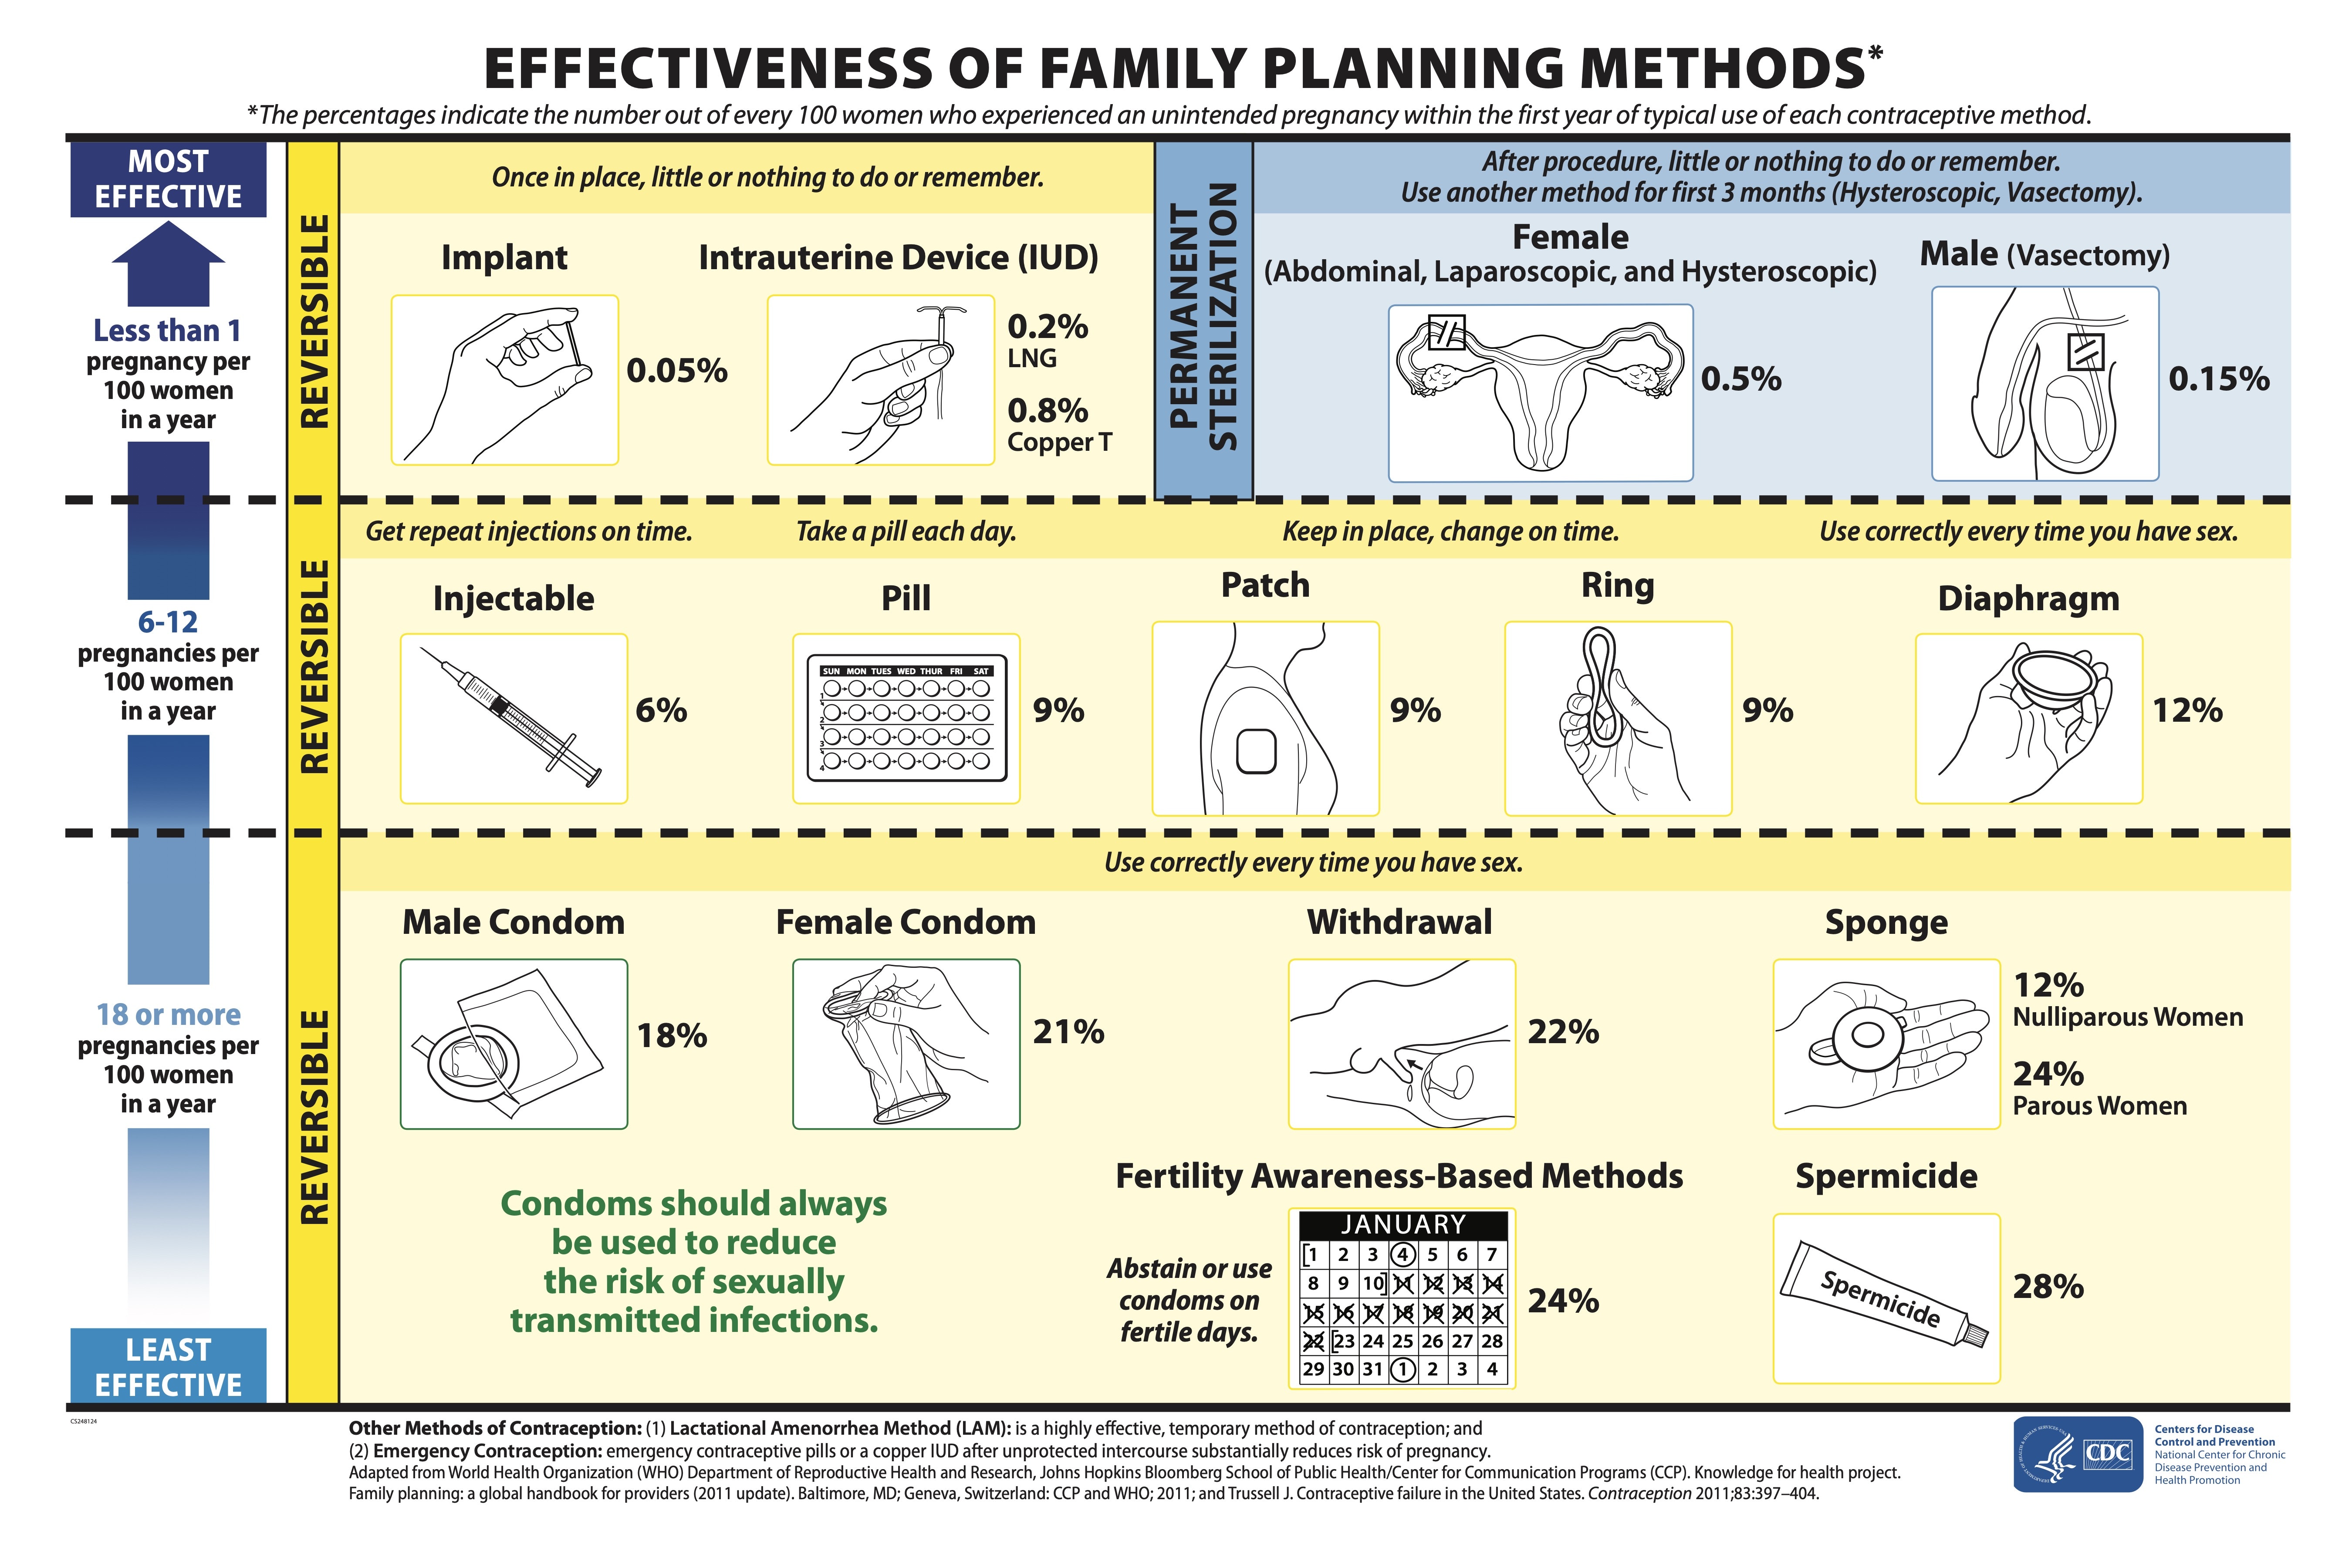 Graphic depiction of the variety of contraception and family planning methods.